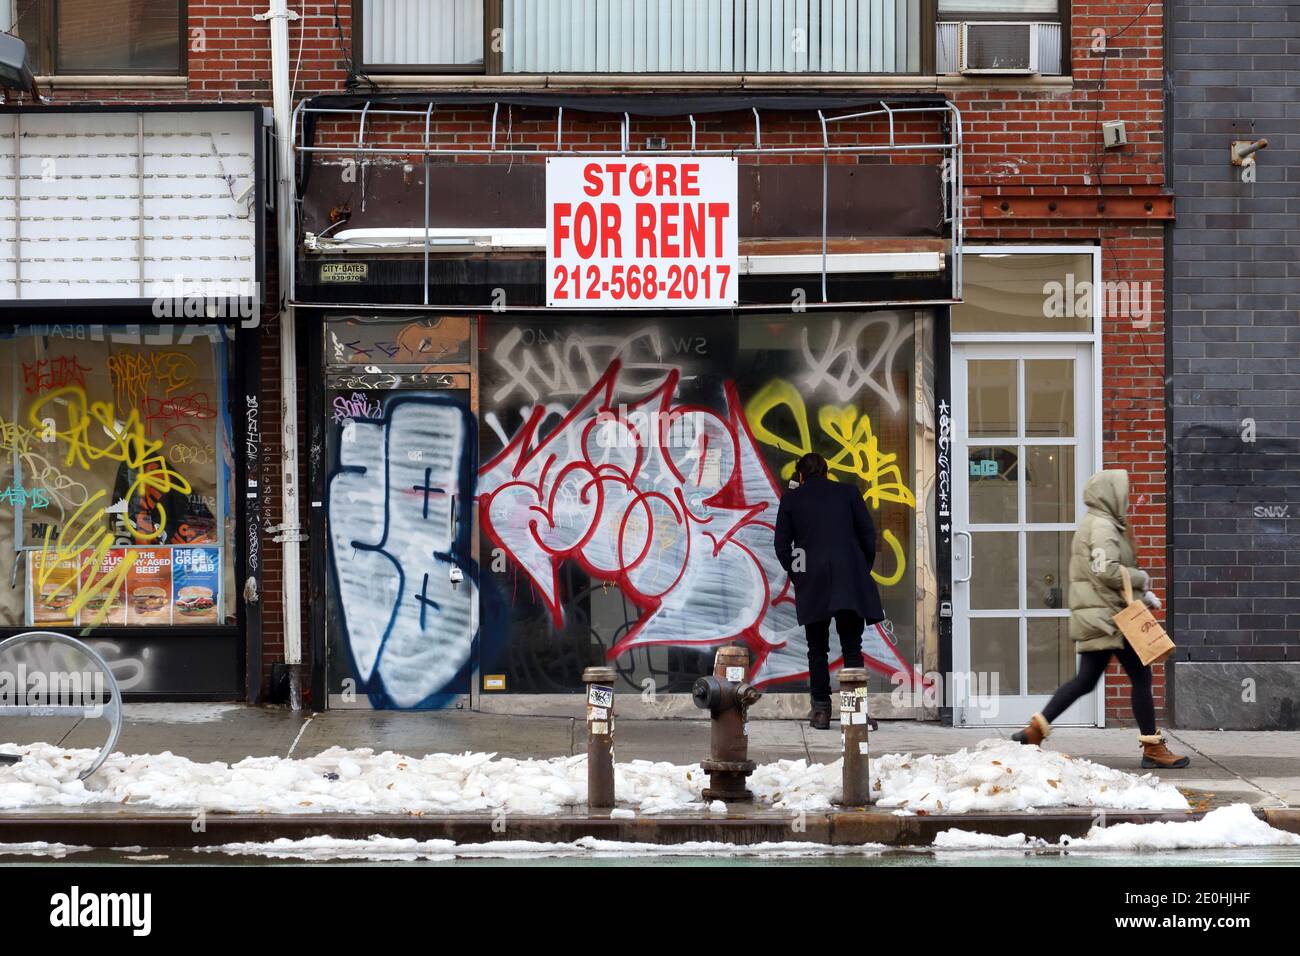 A For Rent sign hangs above a vacant storefront vandalized with graffiti with a person peering through the windows, in New York City. Stock Photo